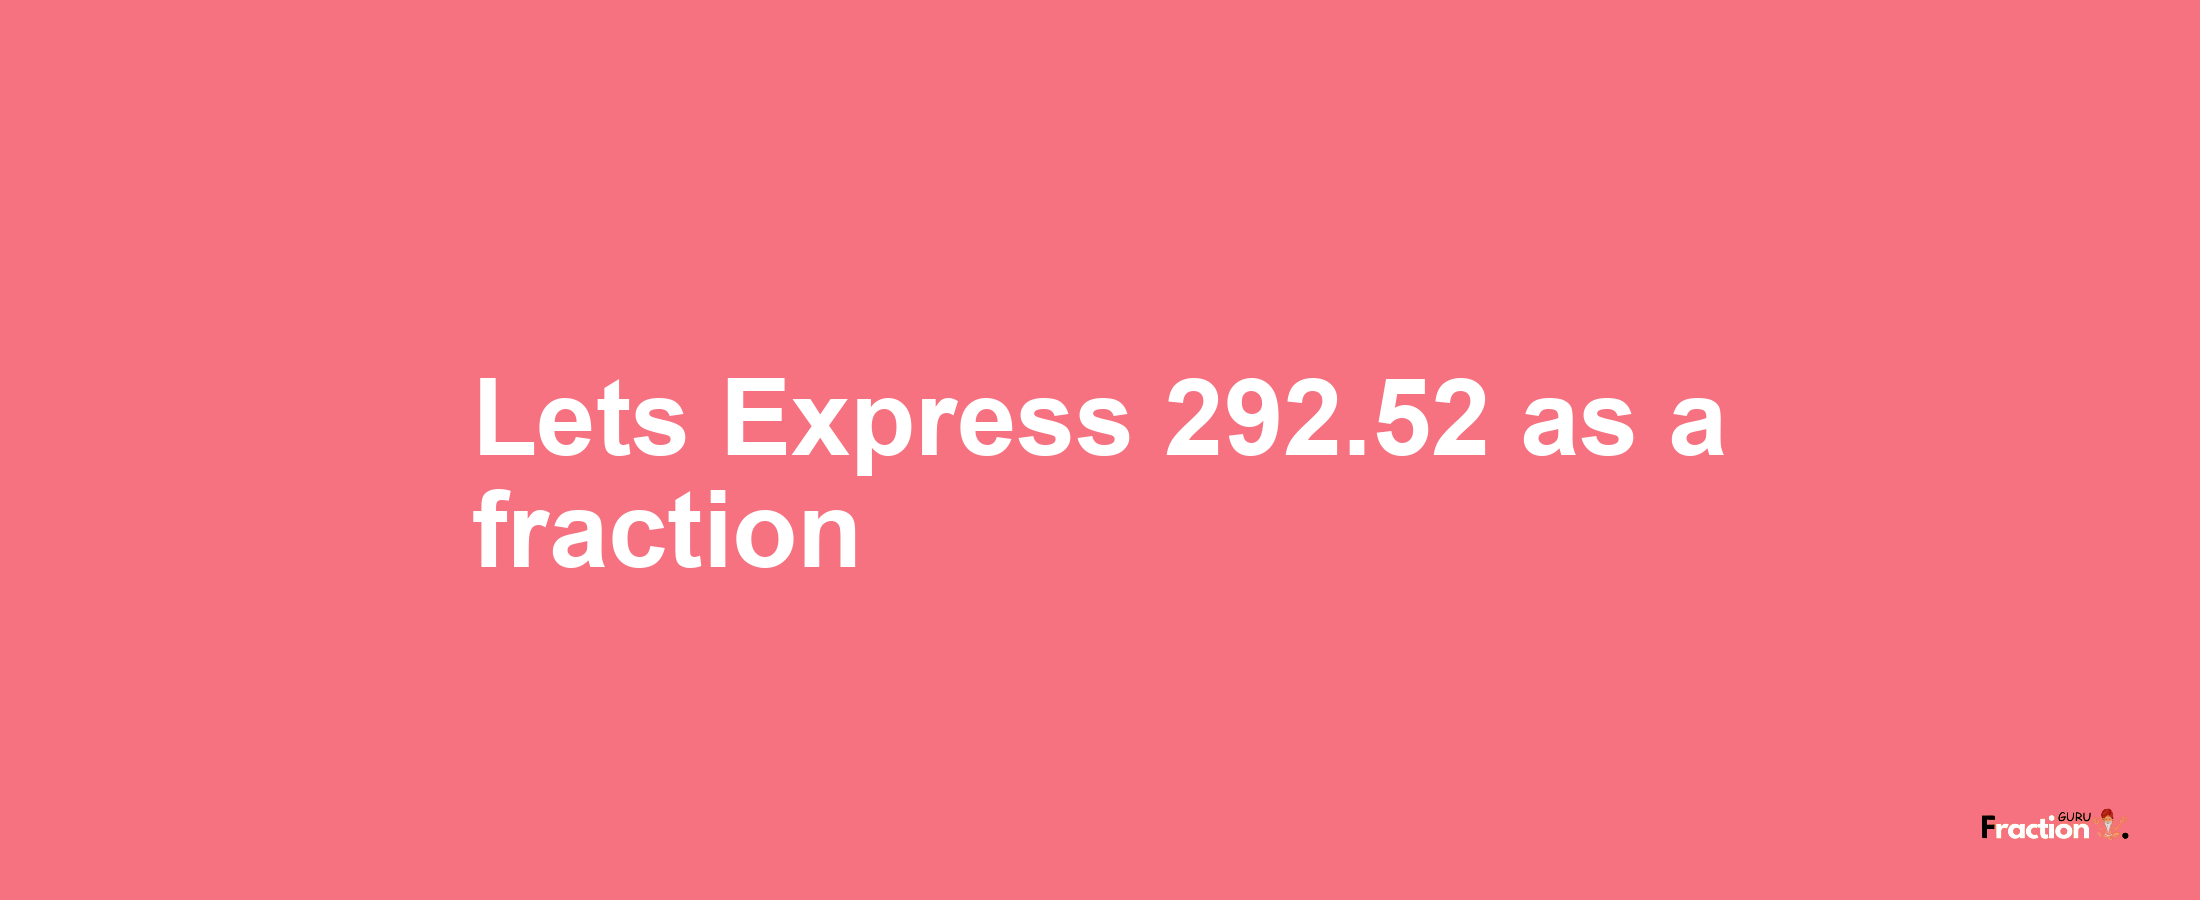 Lets Express 292.52 as afraction